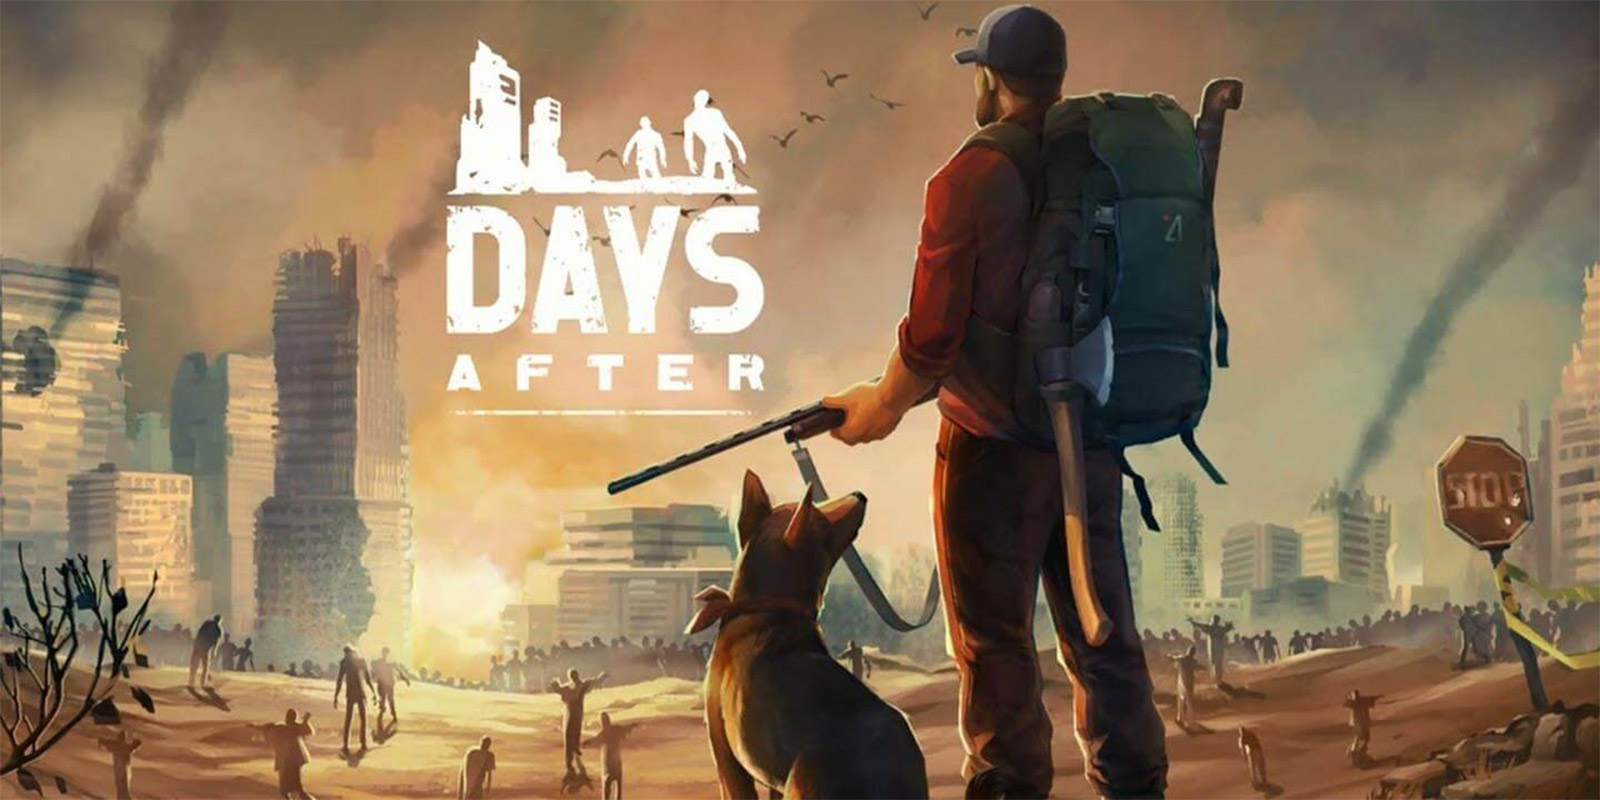 Simple days game. Days after игра. Days after зомби апокалипсис. Days after Zombie Survival. Day after Day игра.